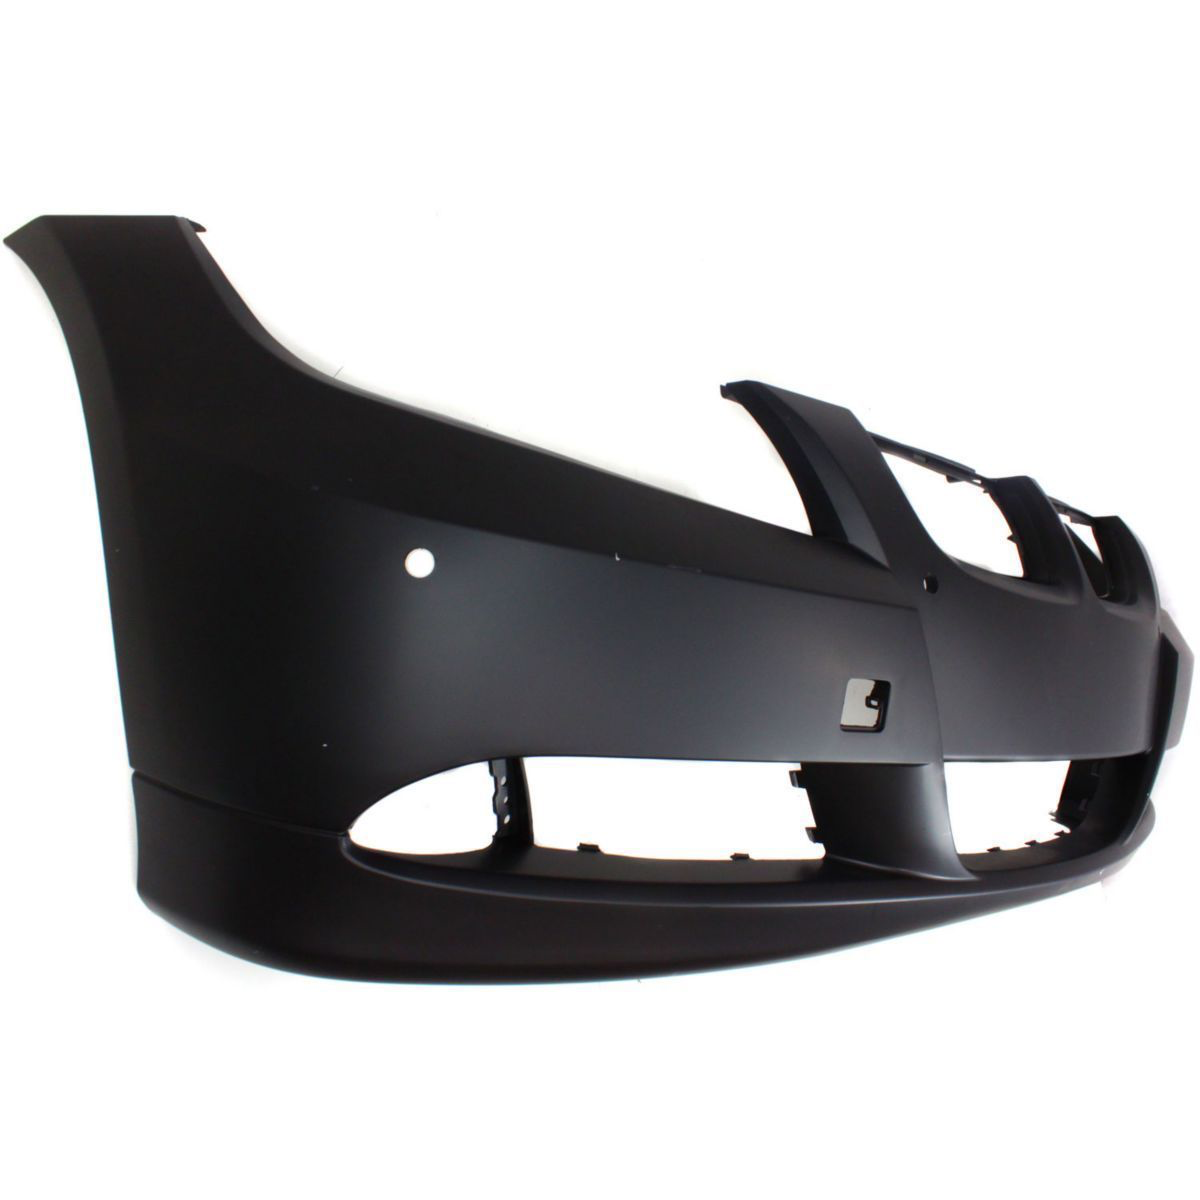 2006-2008 BMW 3-SERIES Front Bumper Cover 4dr sedan/wagon  w/pk distance control  w/o headlamp washer Painted to Match